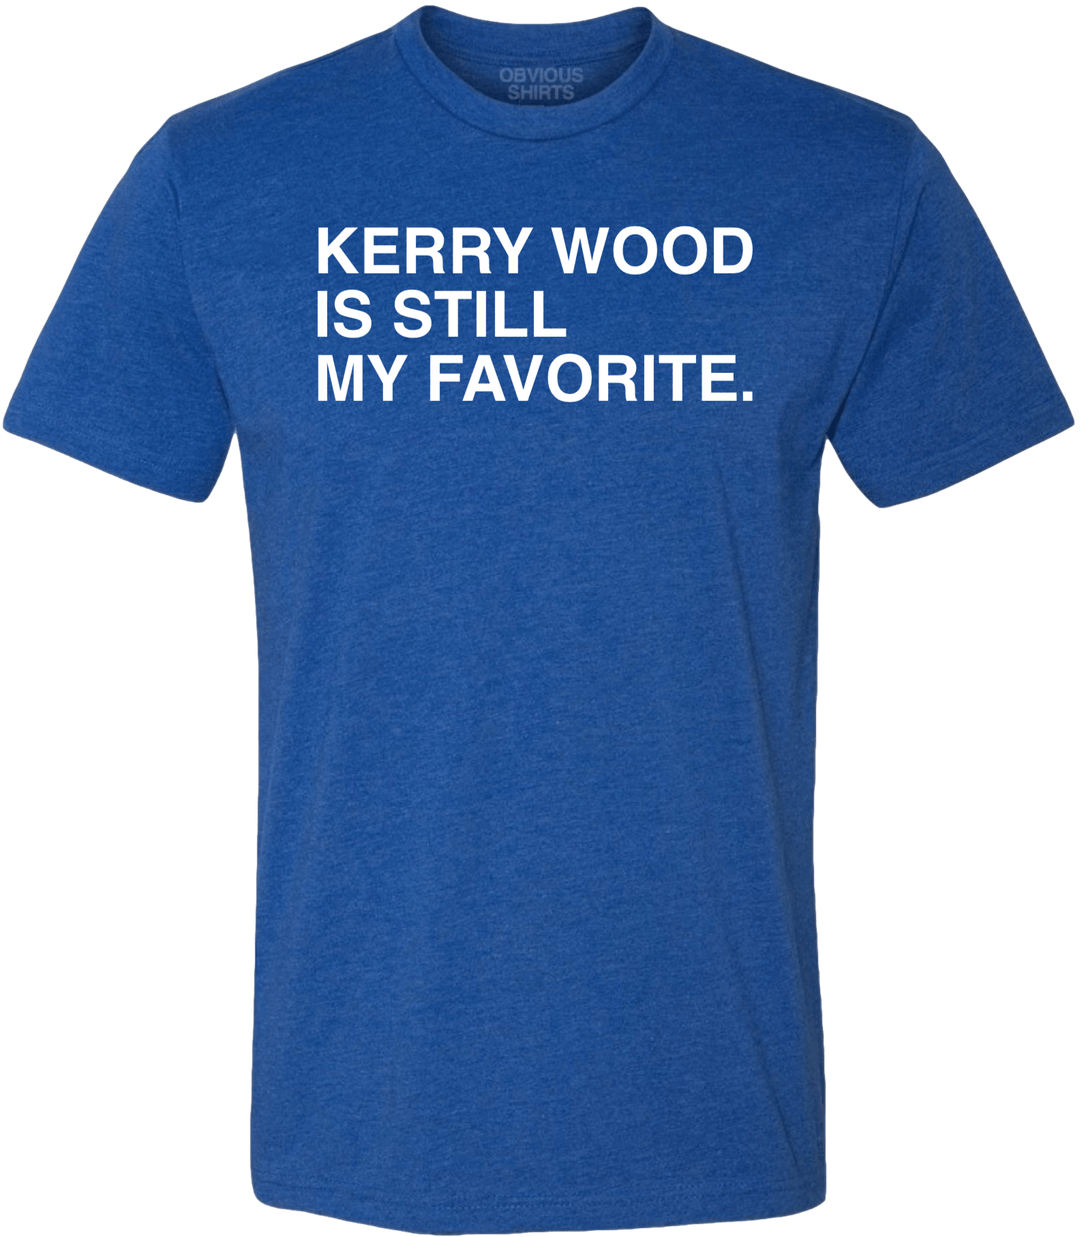 KERRY WOOD IS STILL MY FAVORITE. - OBVIOUS SHIRTS